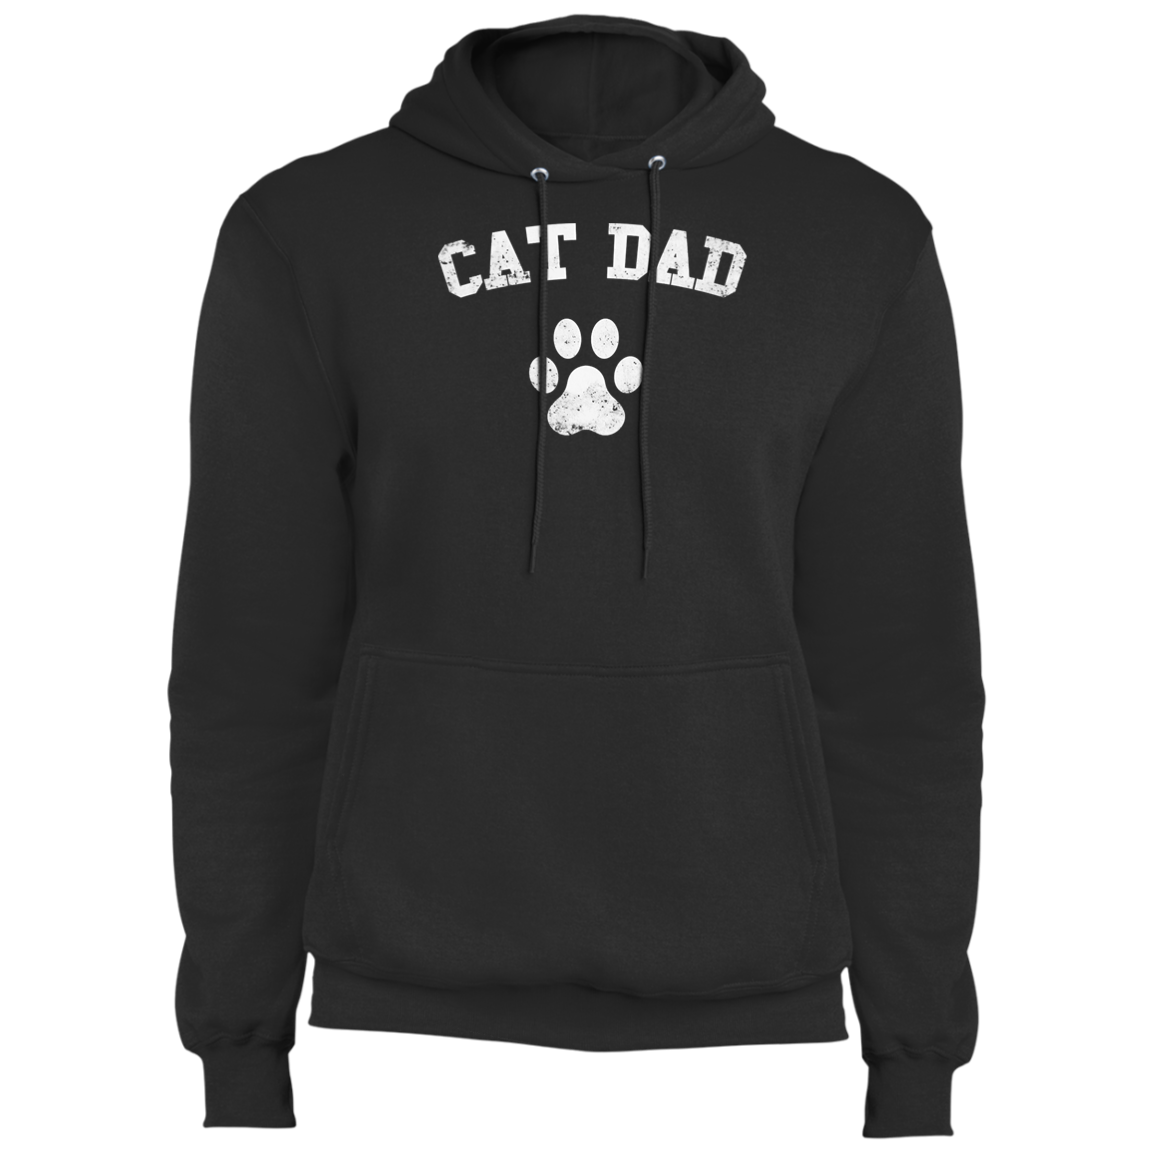 Daddy Gift For Cat Hoodie